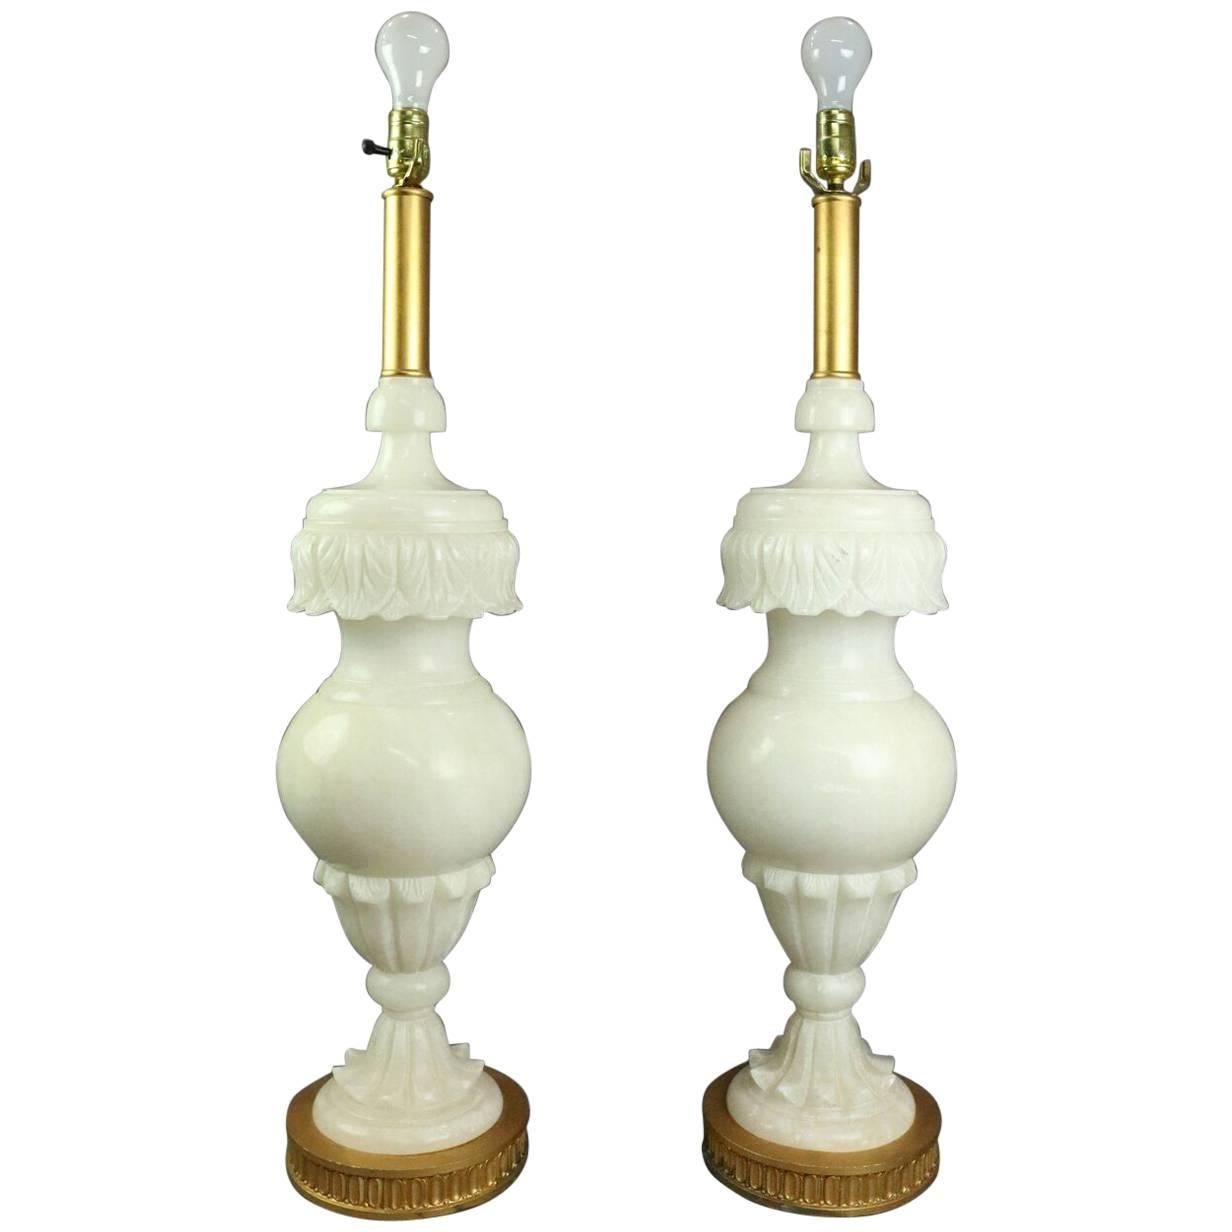 Pair Italian Carved Alabaster Lamps w/Acanthus Leaf Decor on Bronze Bases, 20th 